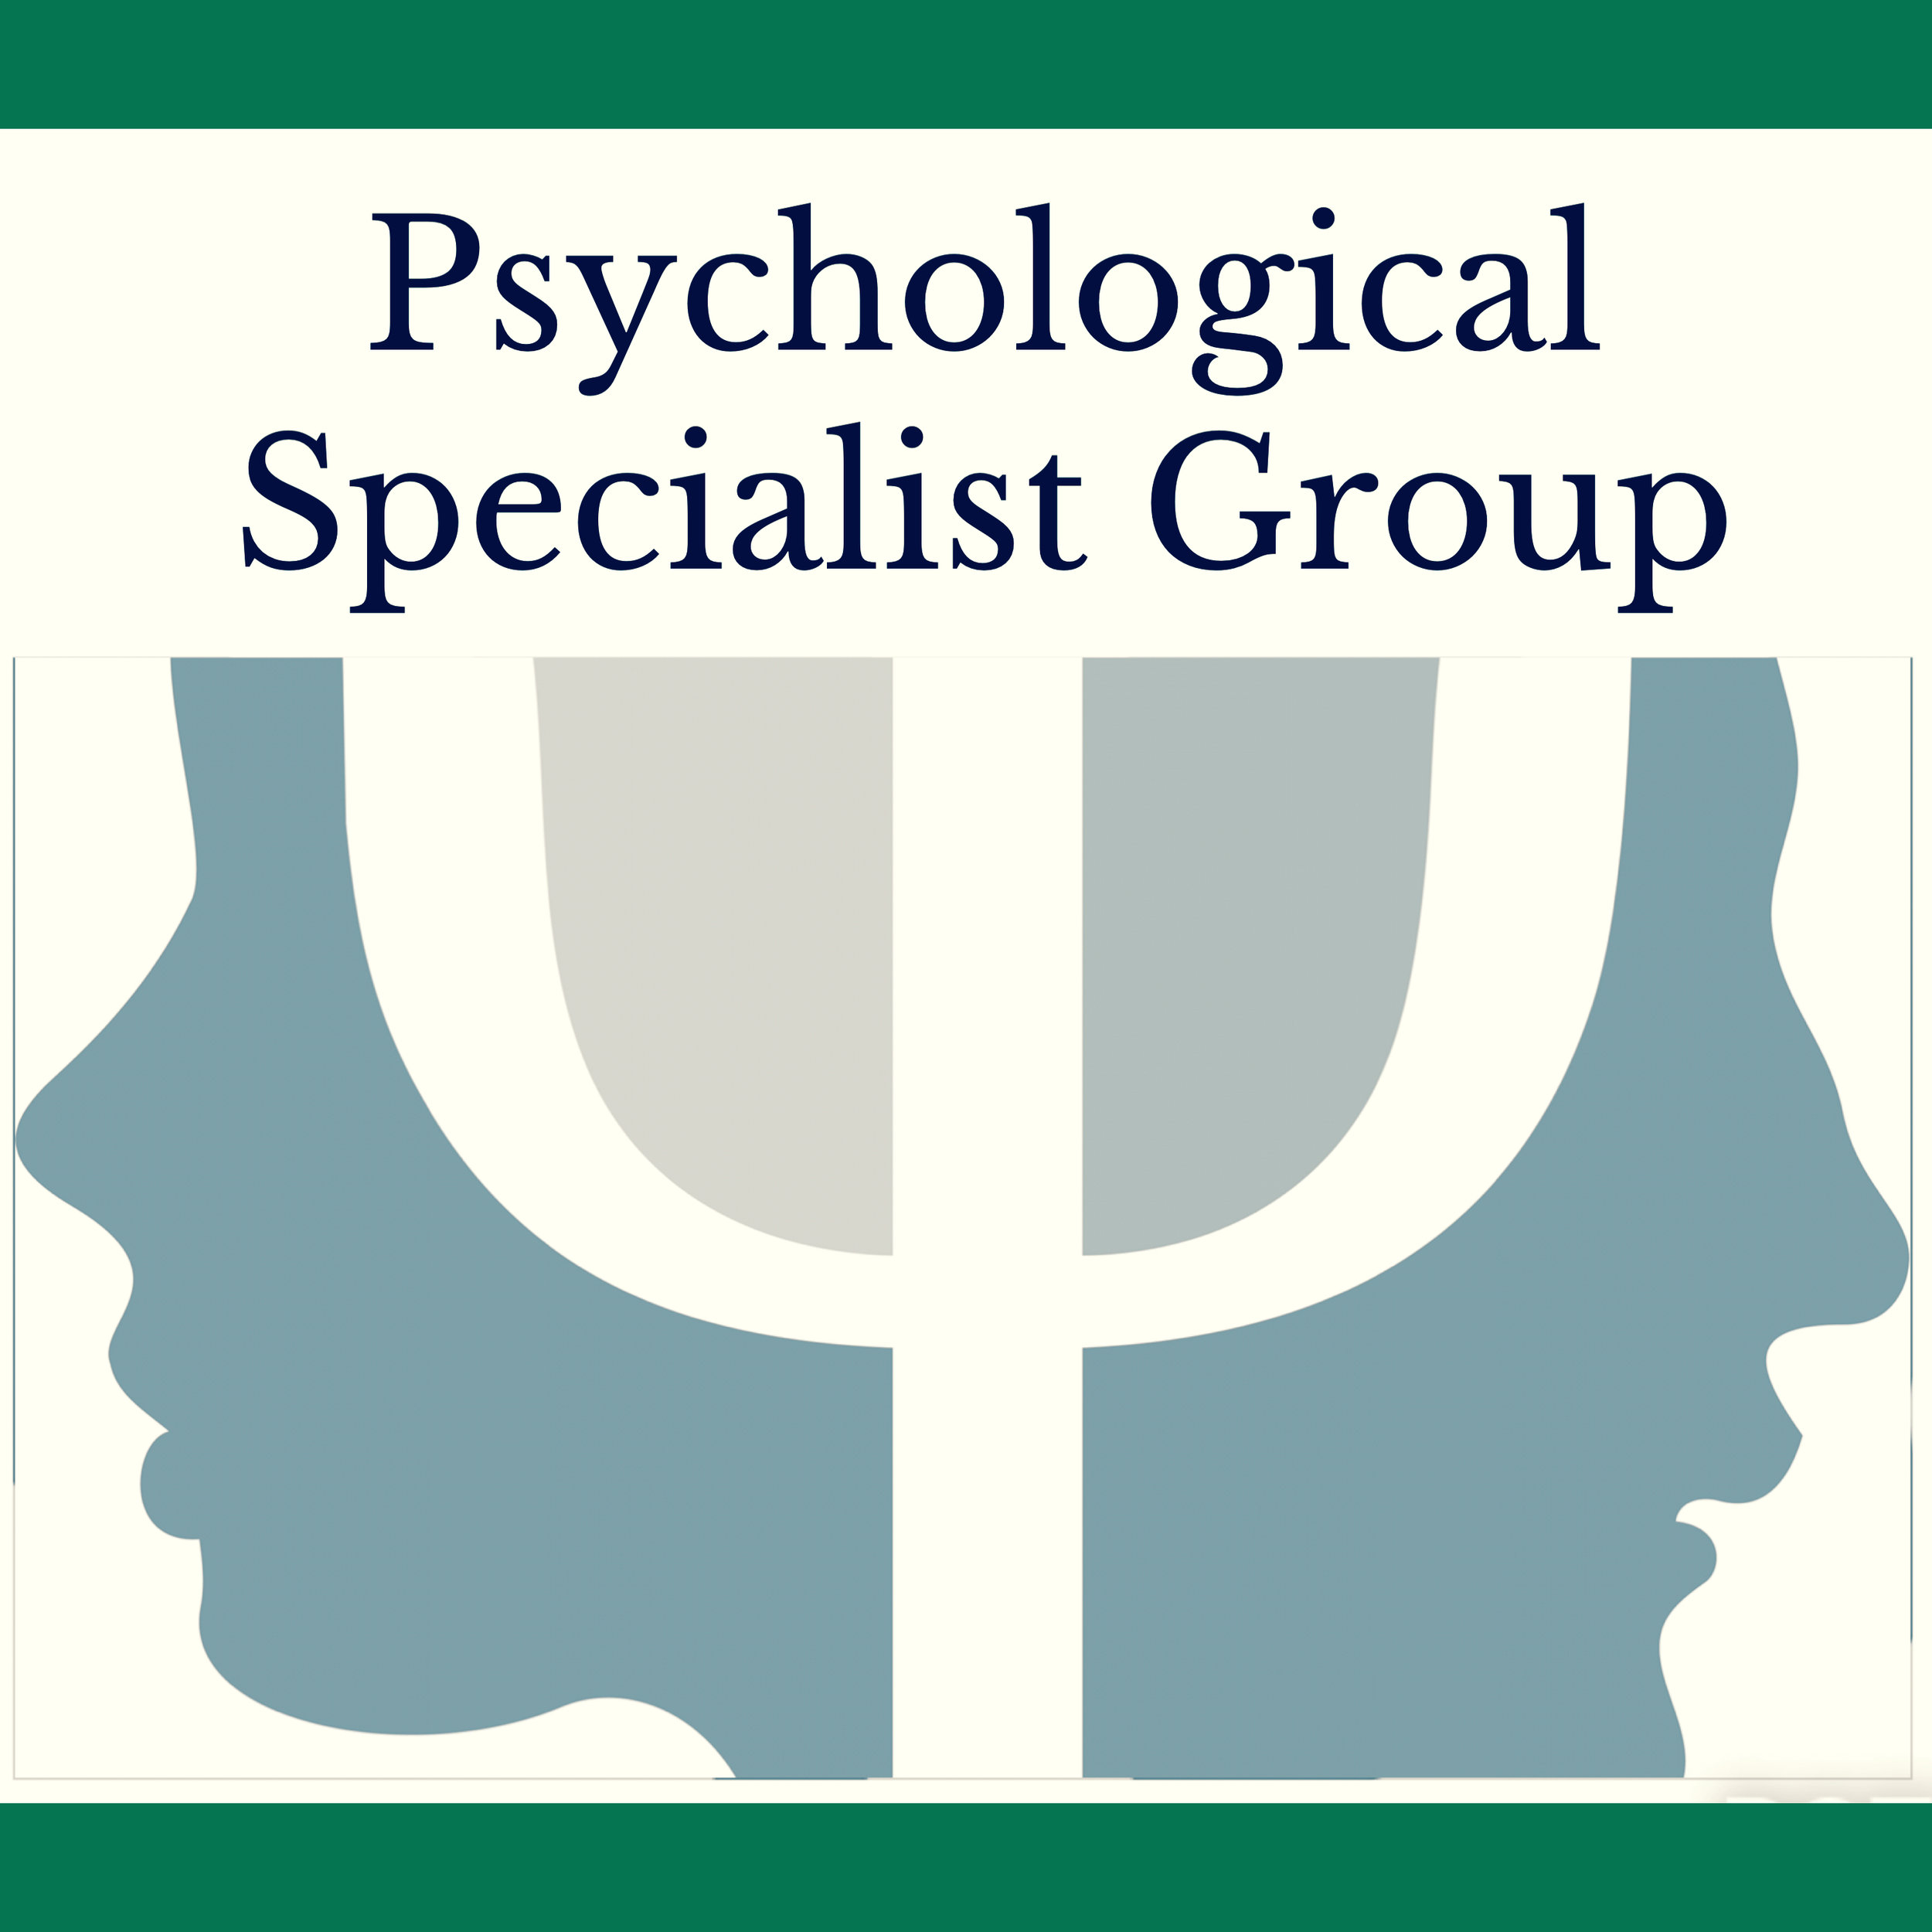 Psychological Specialist Group